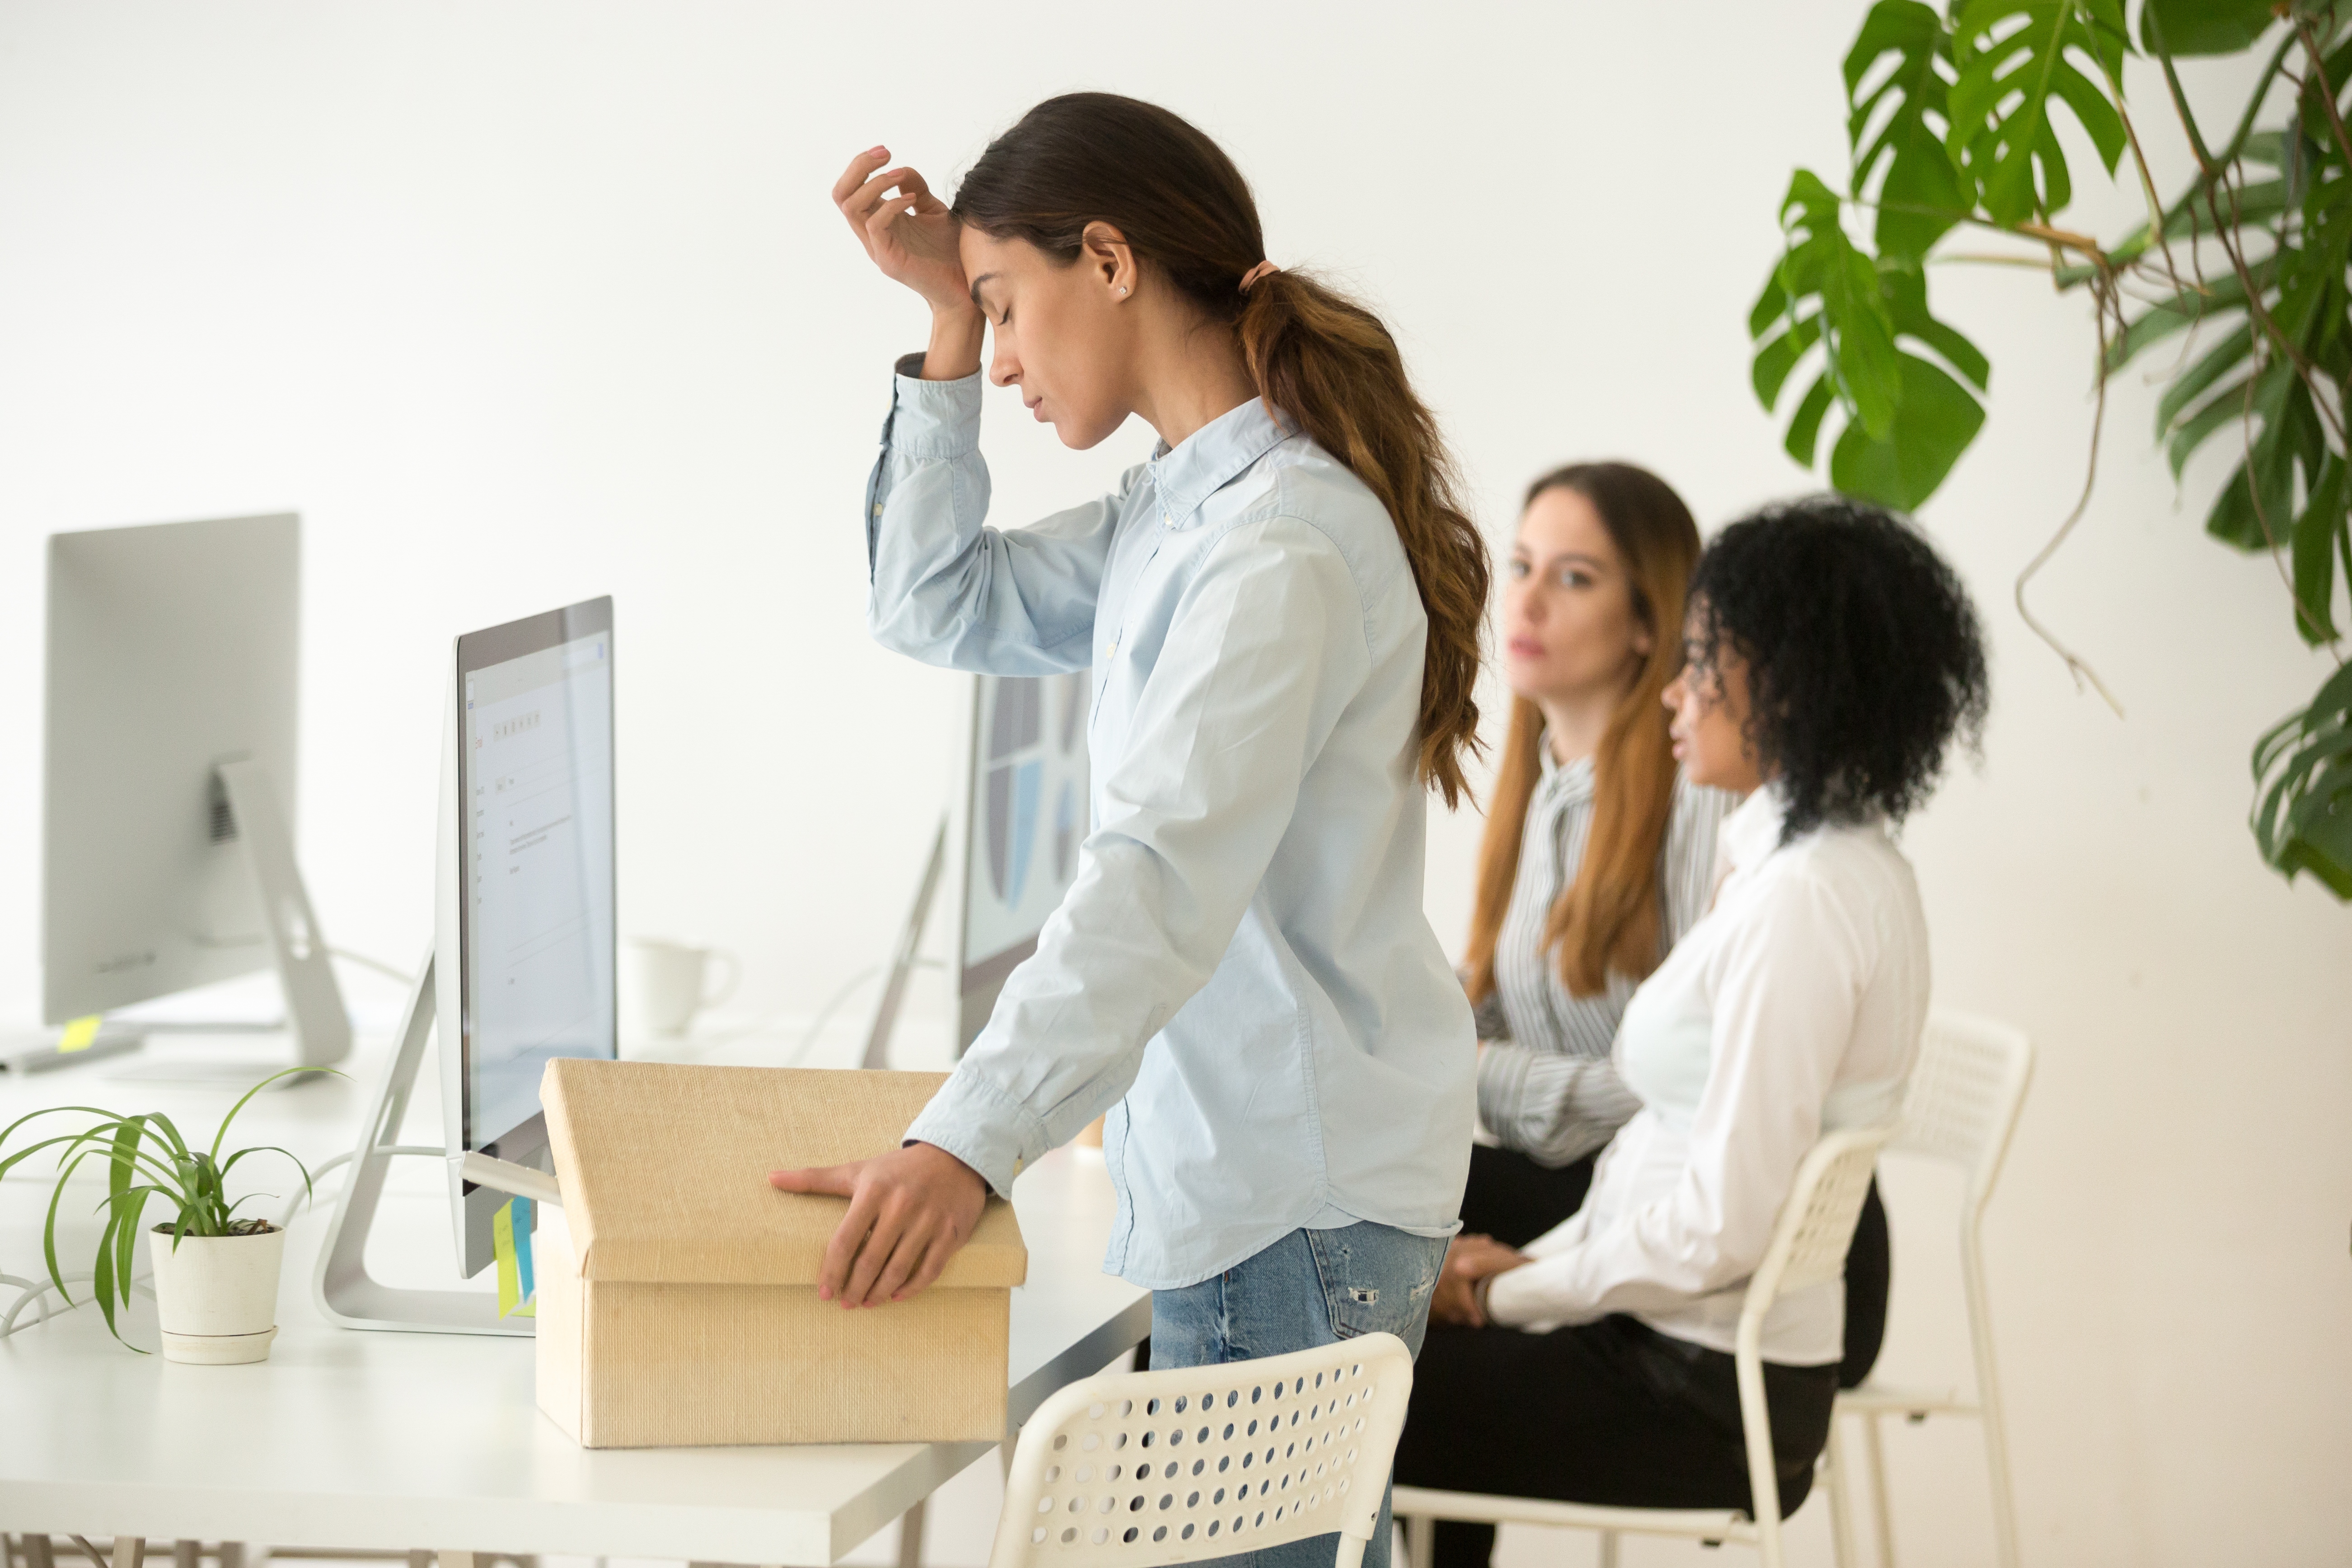 Frustrated woman employee preparing to leave after getting fired from job | Source: Shutterstock